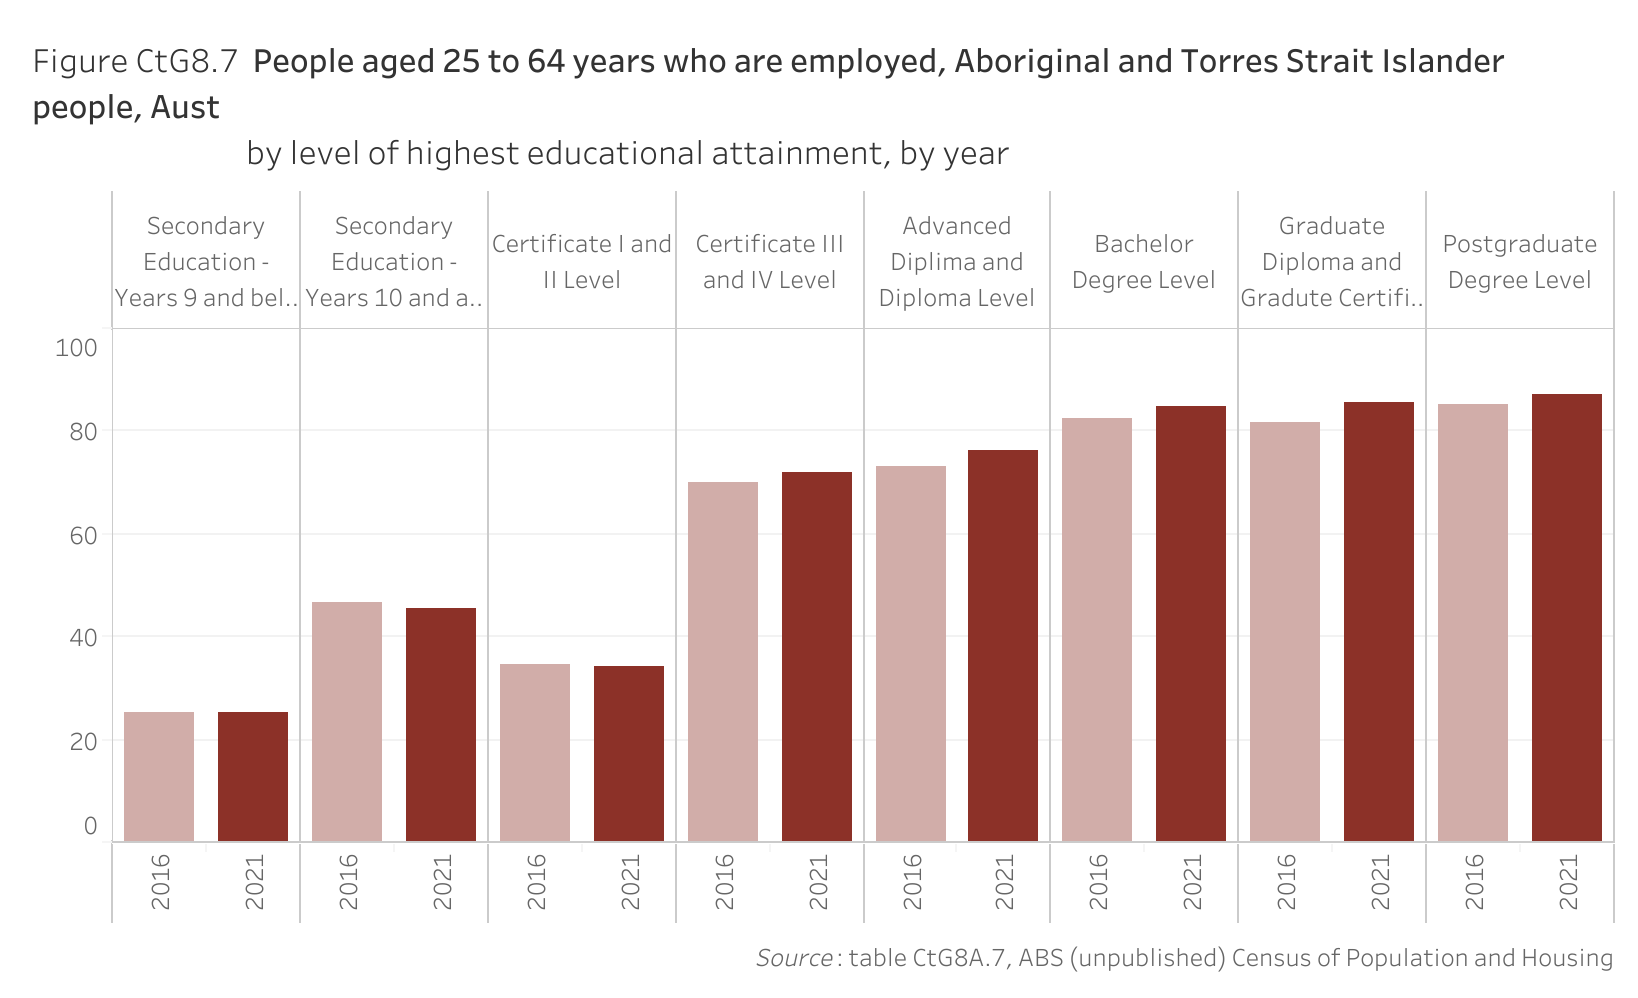 Figure CtG8.7 shows people aged 25 to 64 years who are employed, Aboriginal and Torres Strait Islander people, Australia, by level of highest educational attainment, by year. More details can be found within the text near this image.